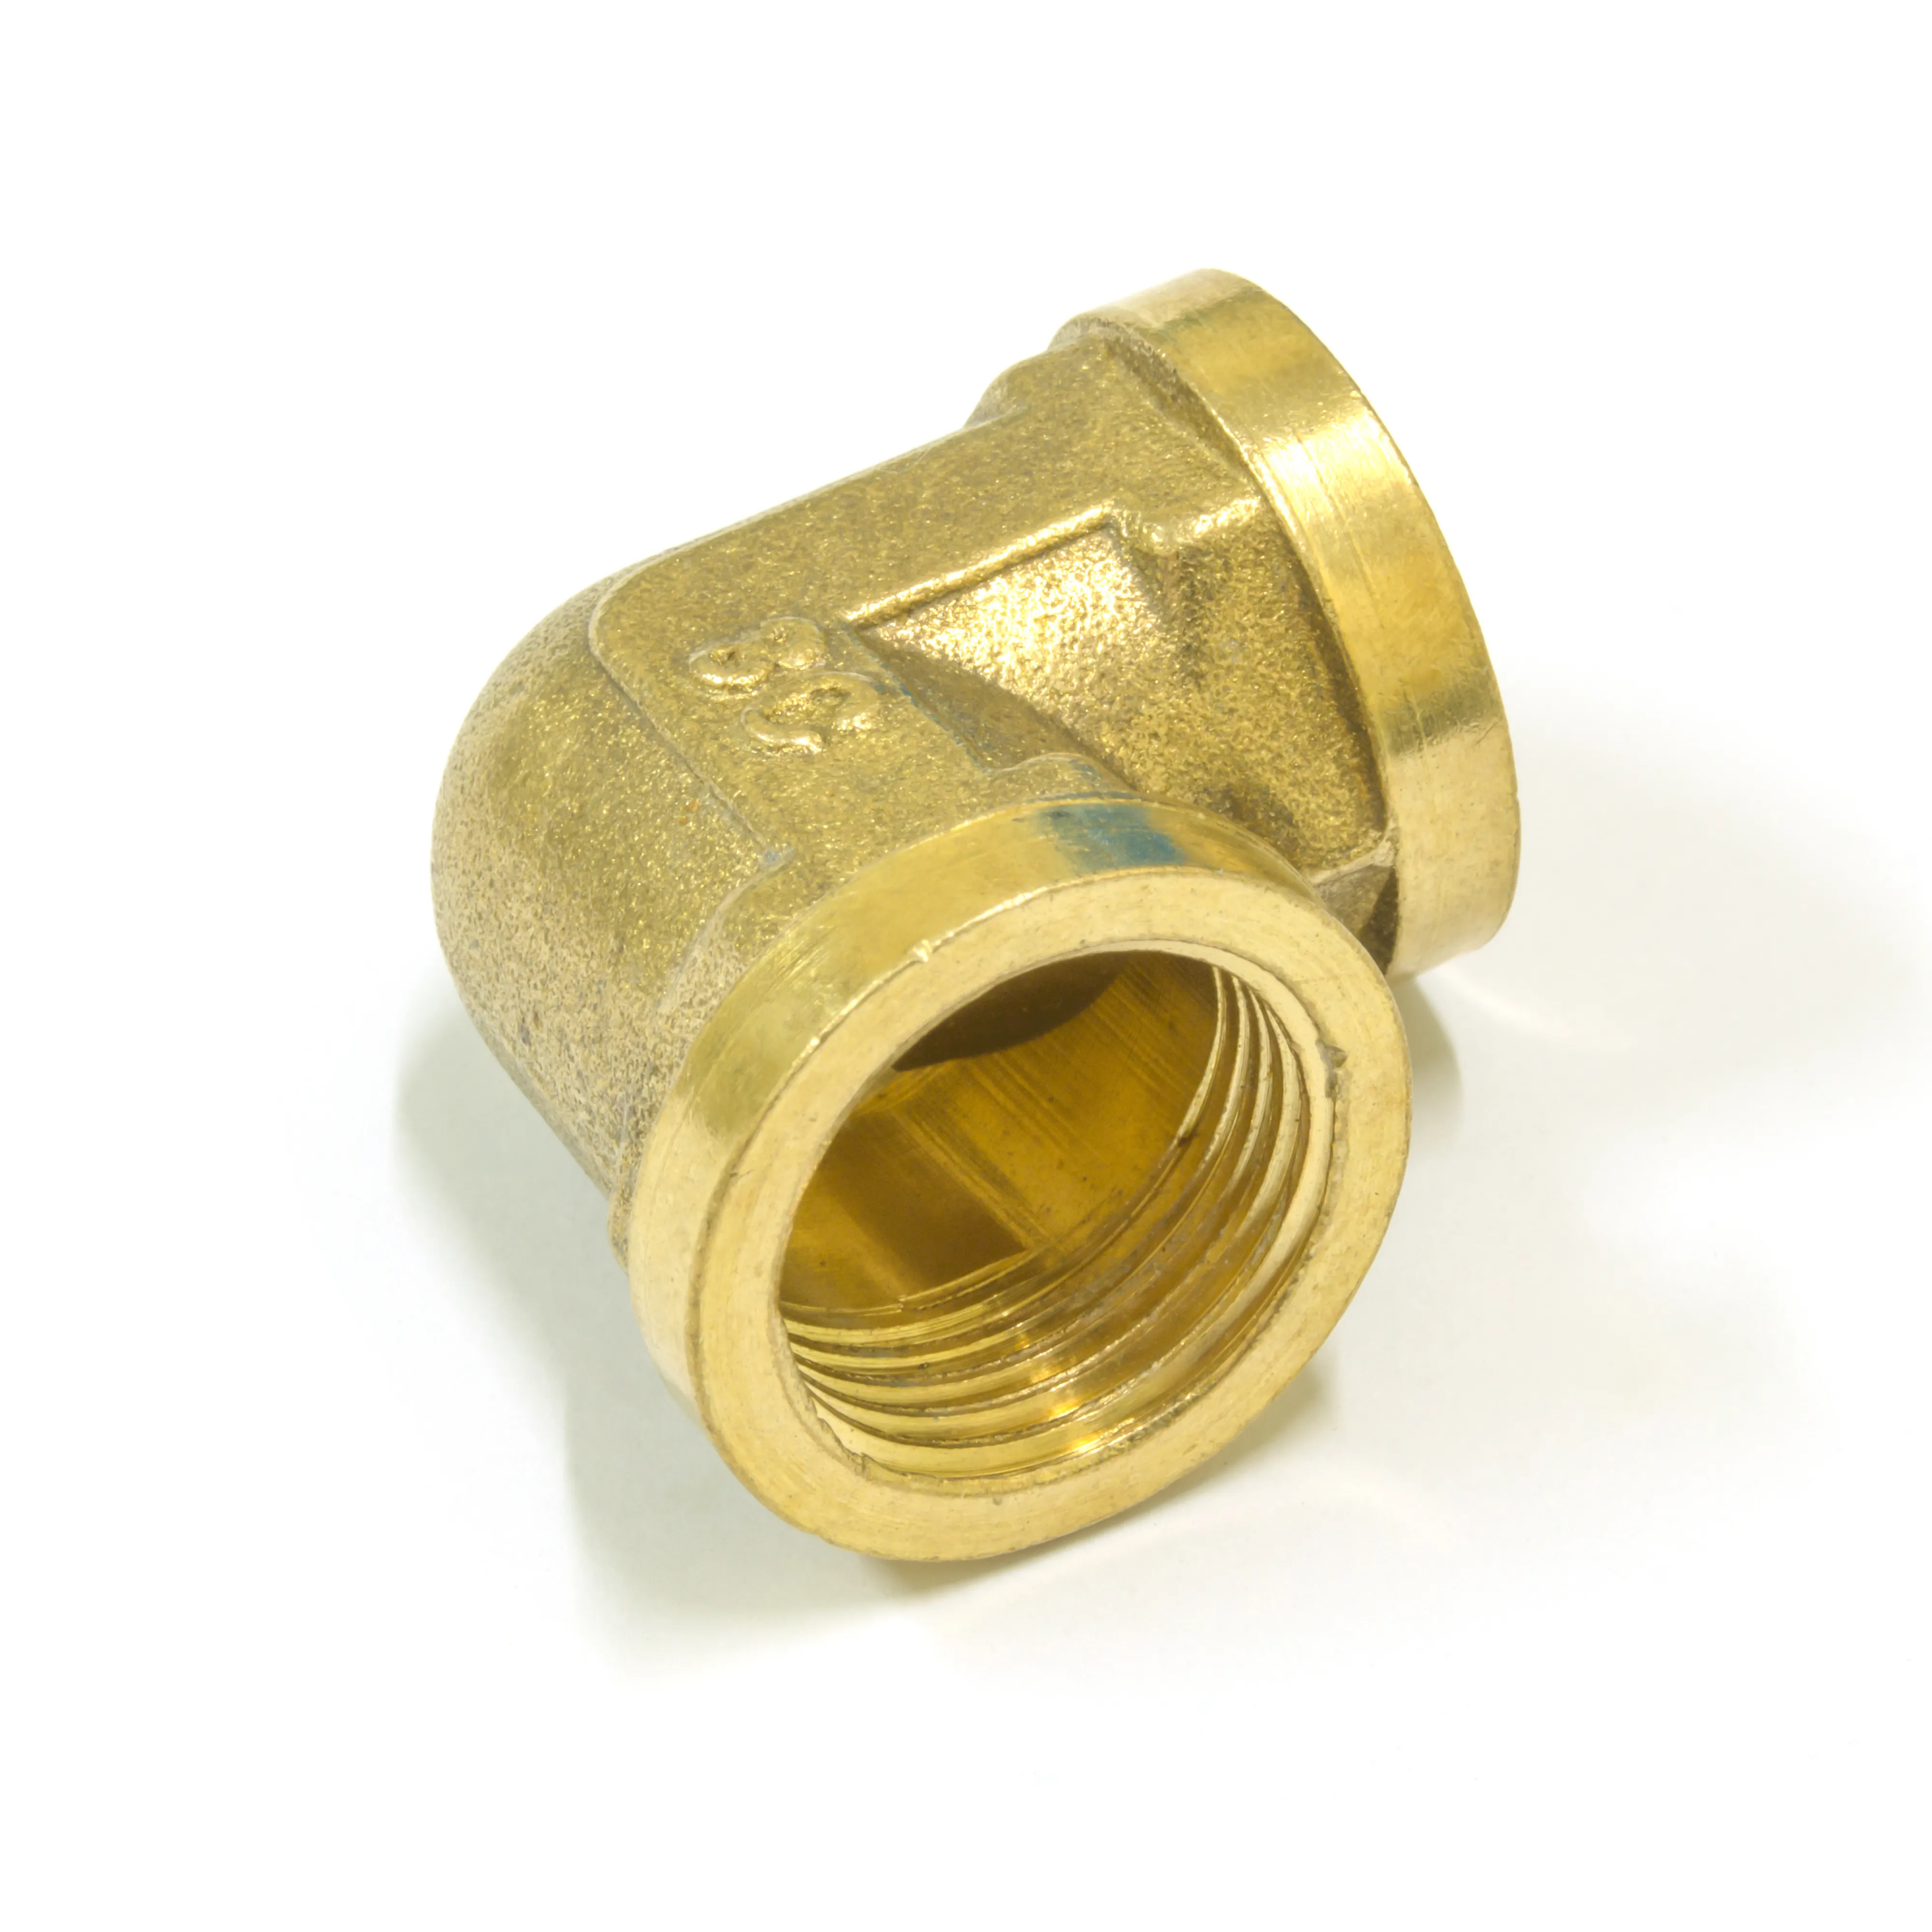 Wholesale Supply Brass Pipes and Fittings for Building and Industries Use Available at Affordable Price from India